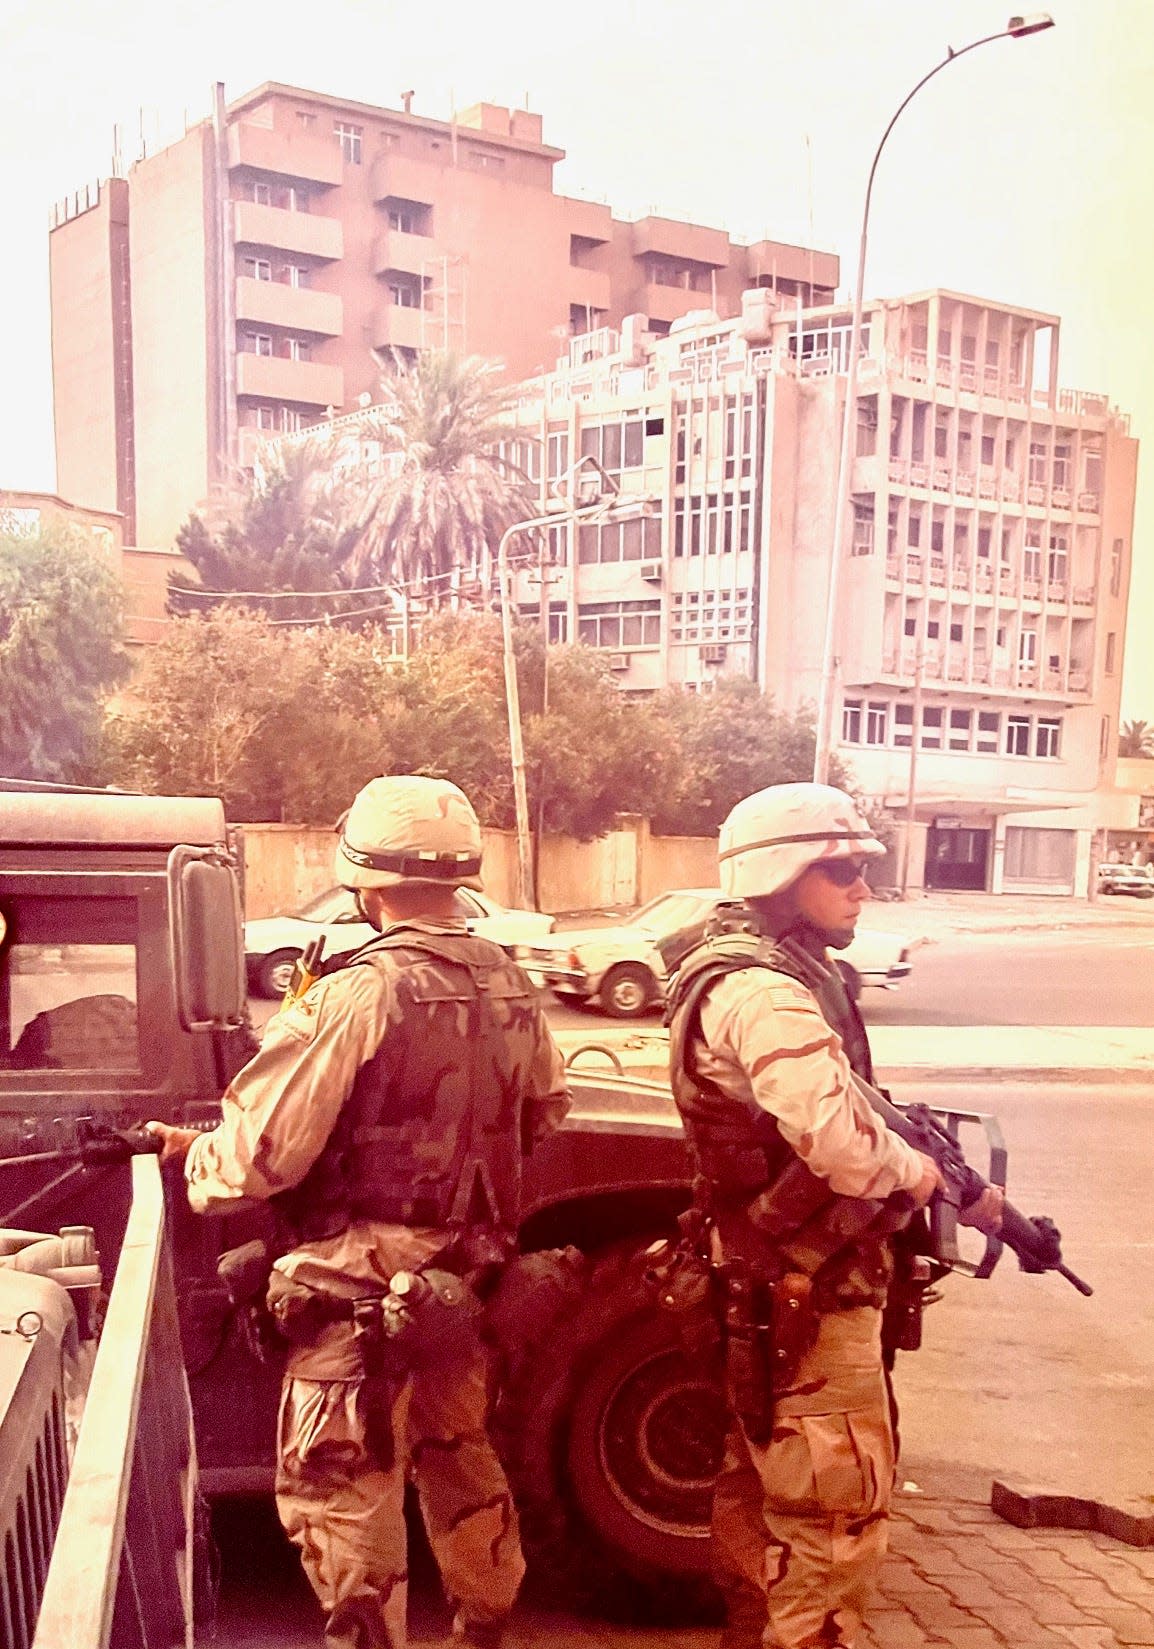 Scott Spitnale, right, during his U.S. Special Forces tour in Baghdad from 2003-2004.